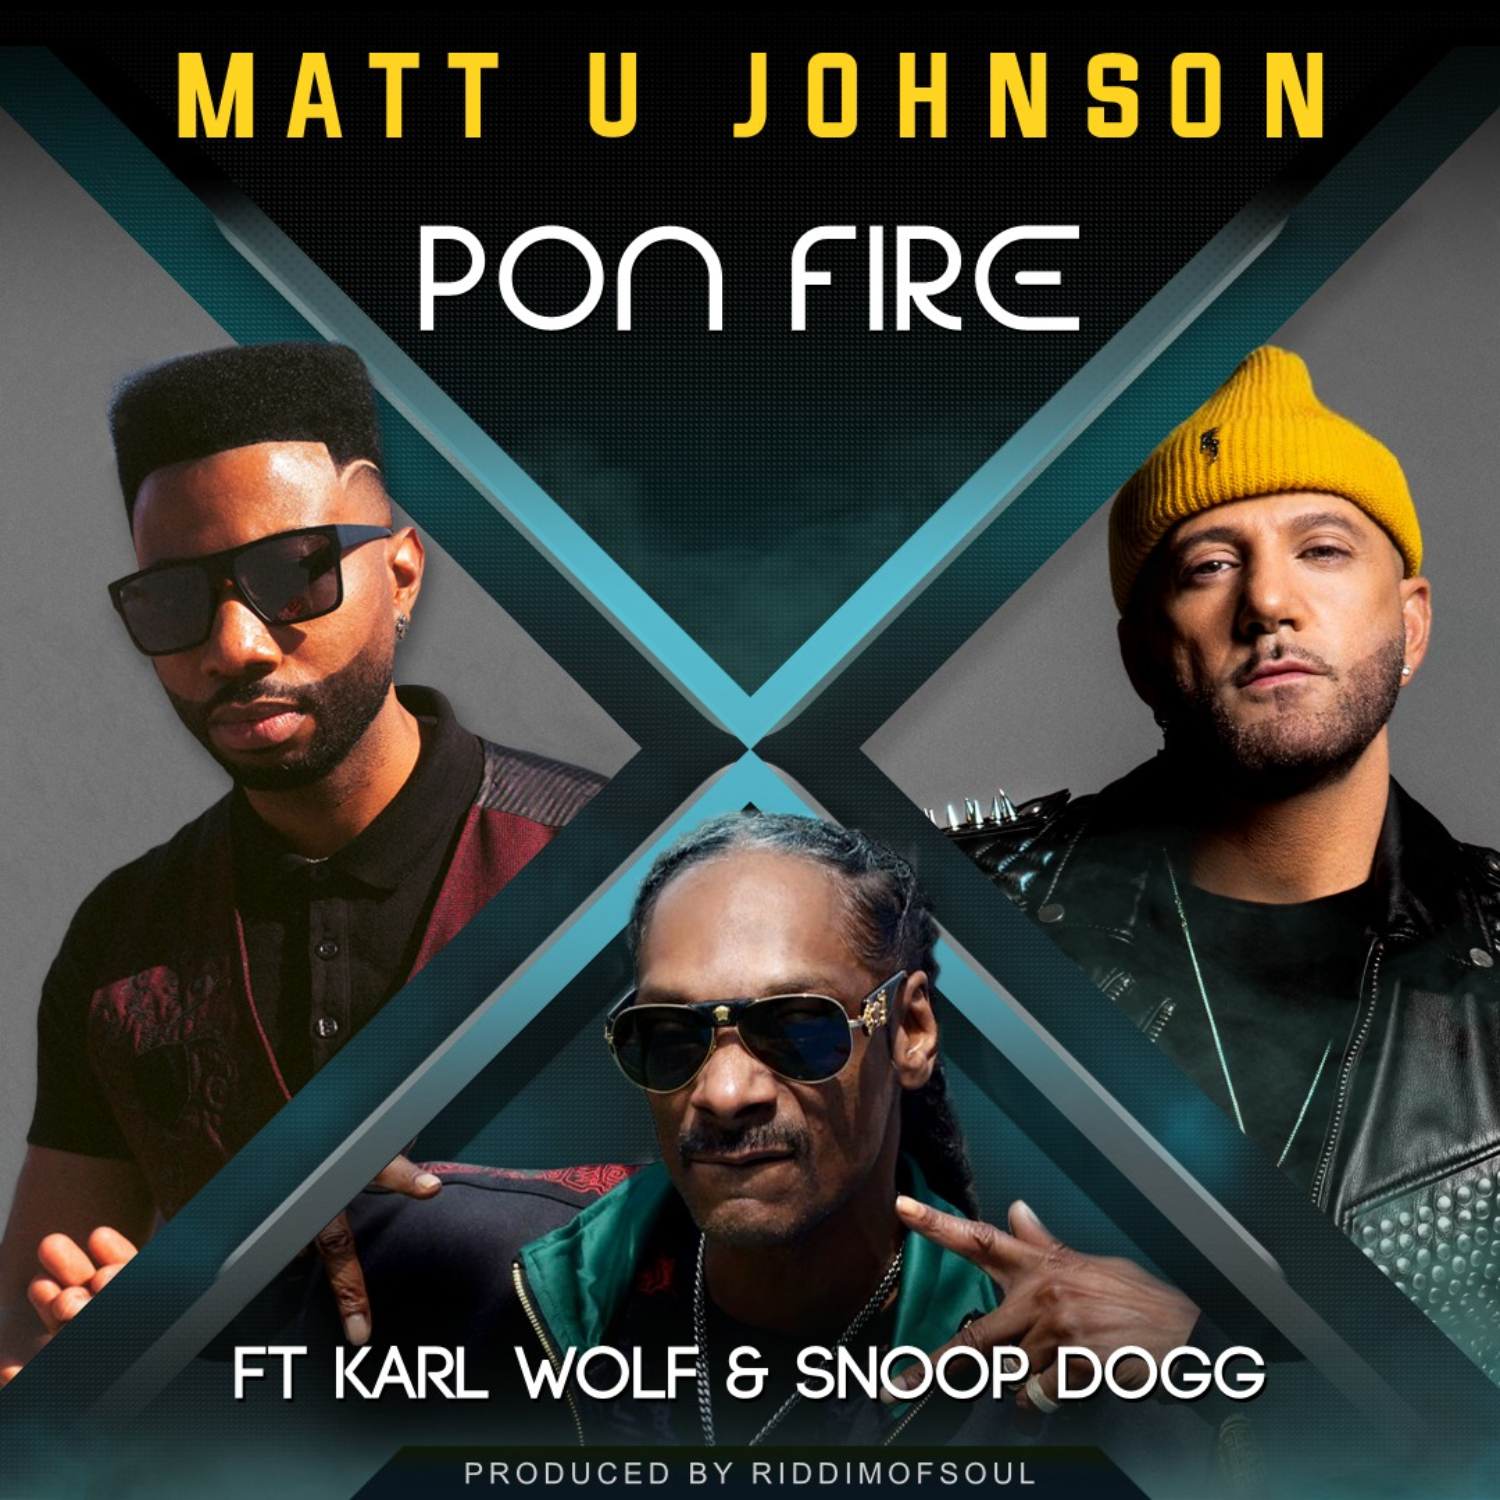 Multi-faceted virtuoso ‘Matt U Johnson’ joins superstars ‘Snoop Dogg’ and ‘Karl Wolf’ for new single ‘Pon Fire’